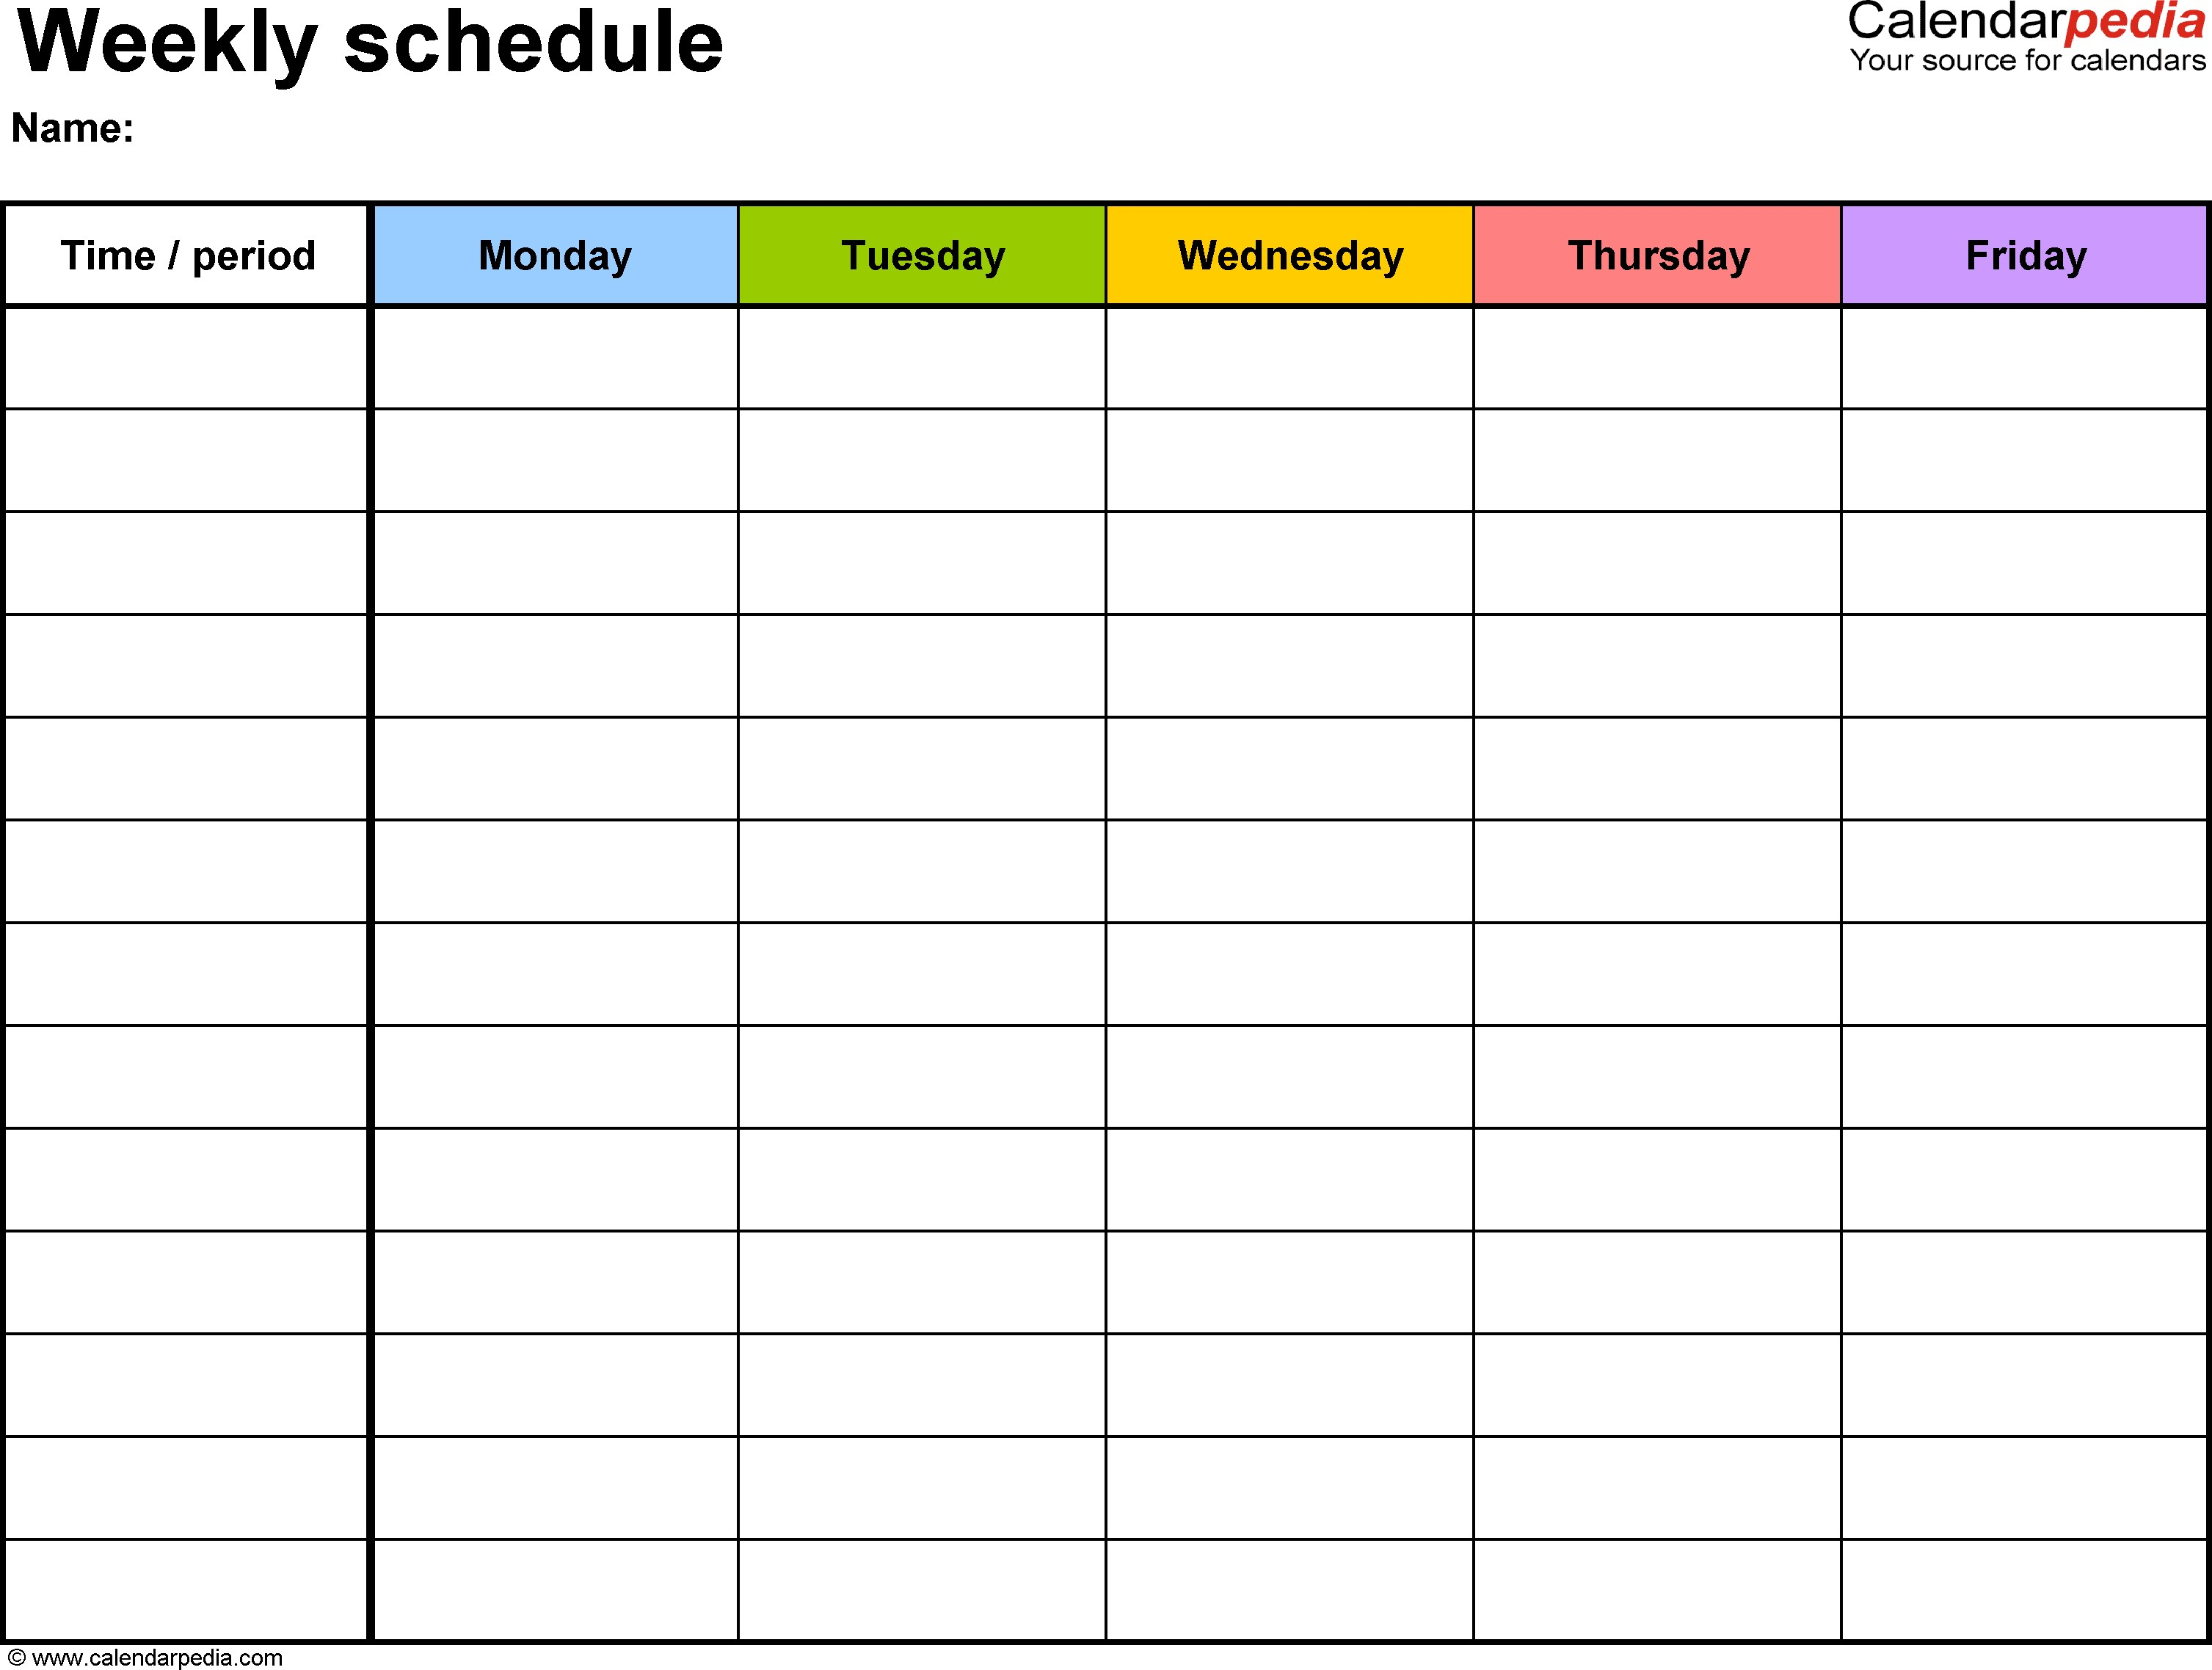 Weekly Calendar With Time Slots  Bolan.horizonconsulting.co within Printable Weekly Calendar Template With Time Slots